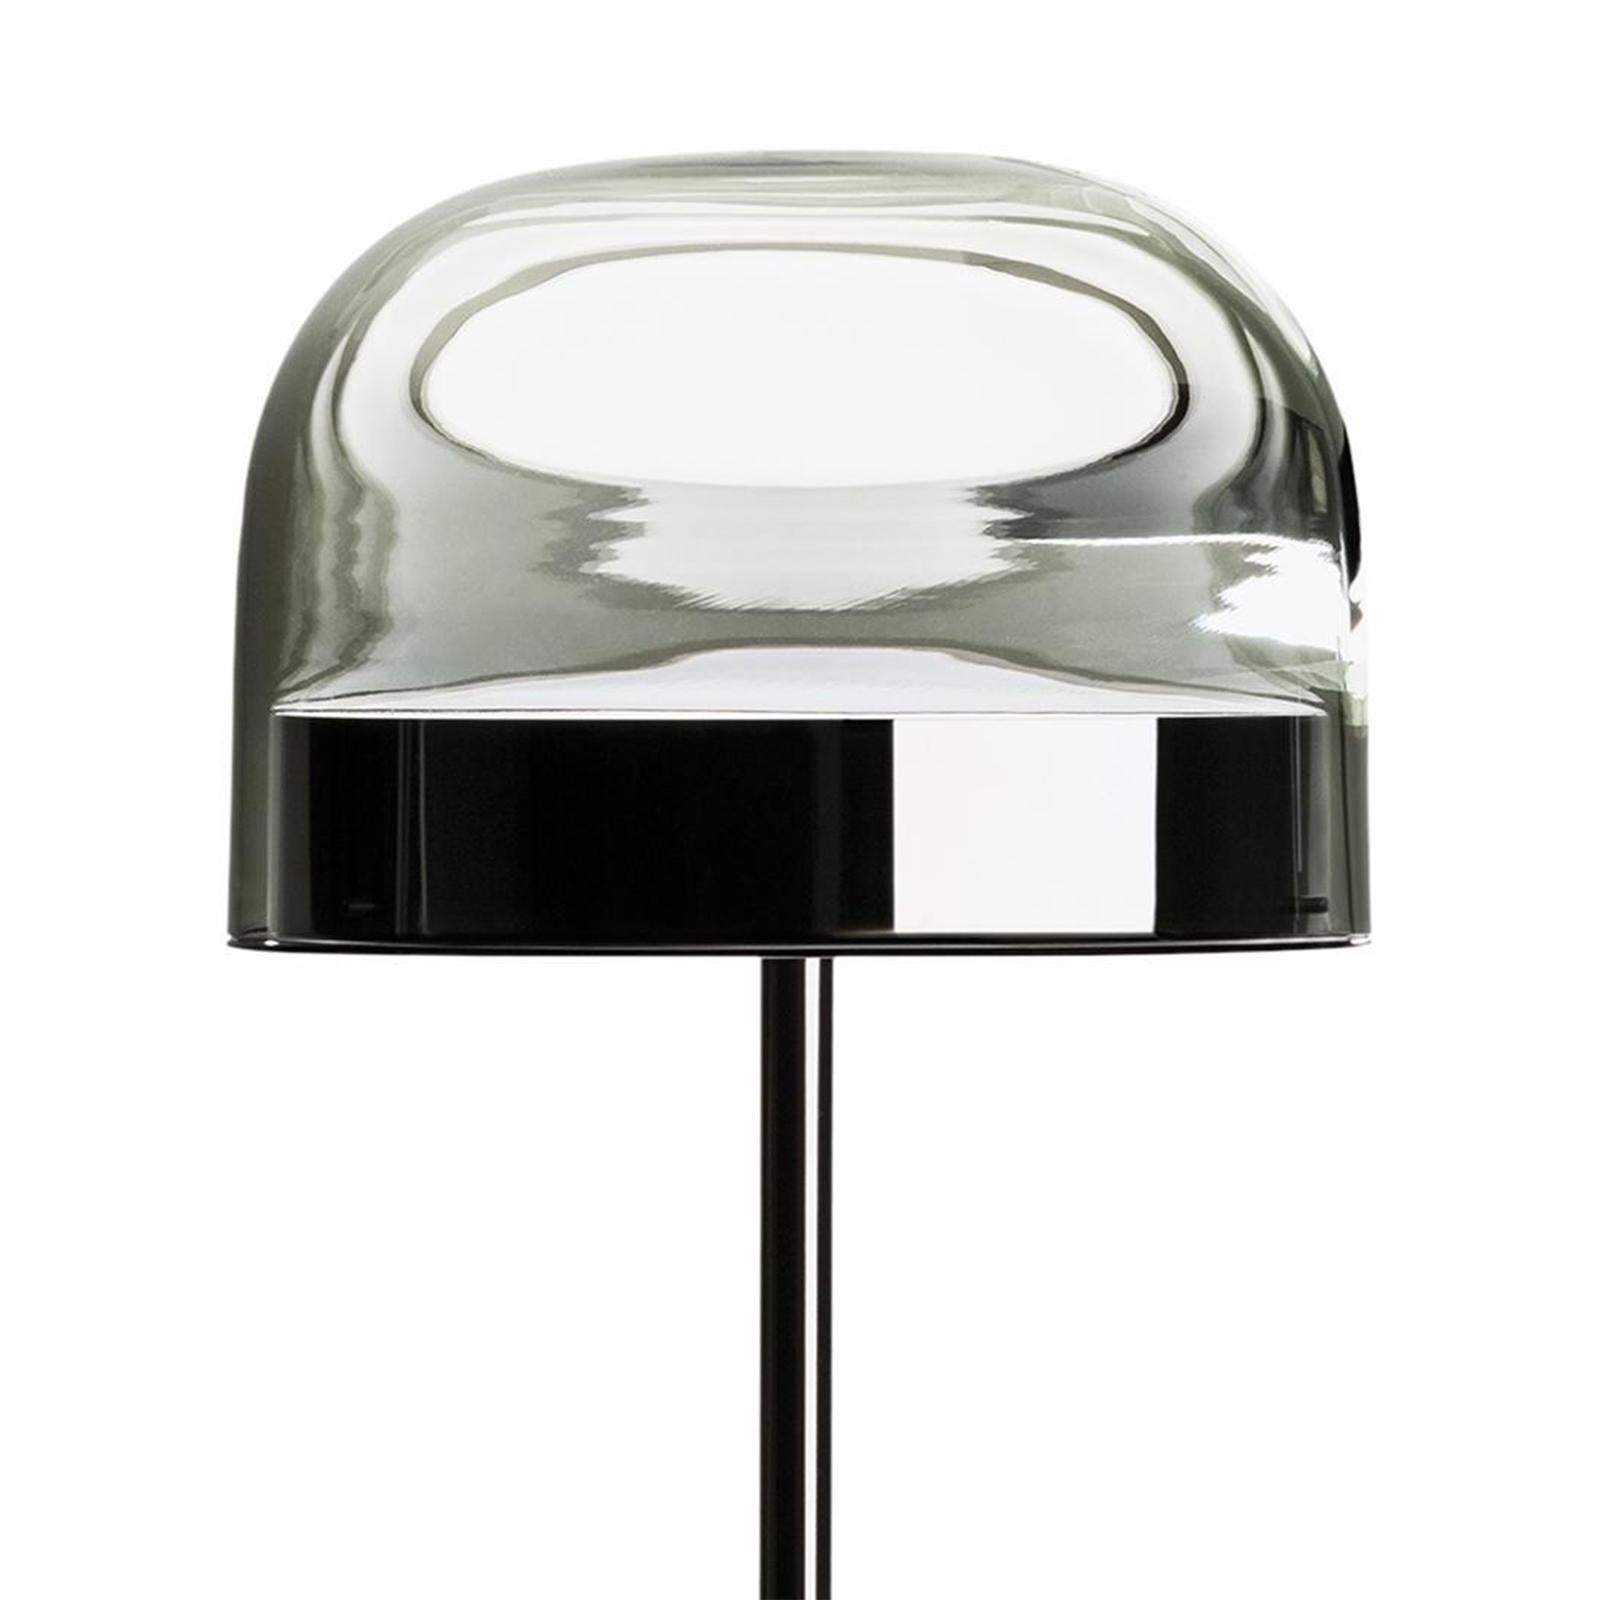 Table lamp sober shade with metal black
chromed base and shade in black glass.
With double led disc light, 25W Led, 2700K,
CRI>90, Lumen 1770.
Measures: In diameter 36cm x height 60cm, price: 2950,00€.
Also available in diameter 24cm x height